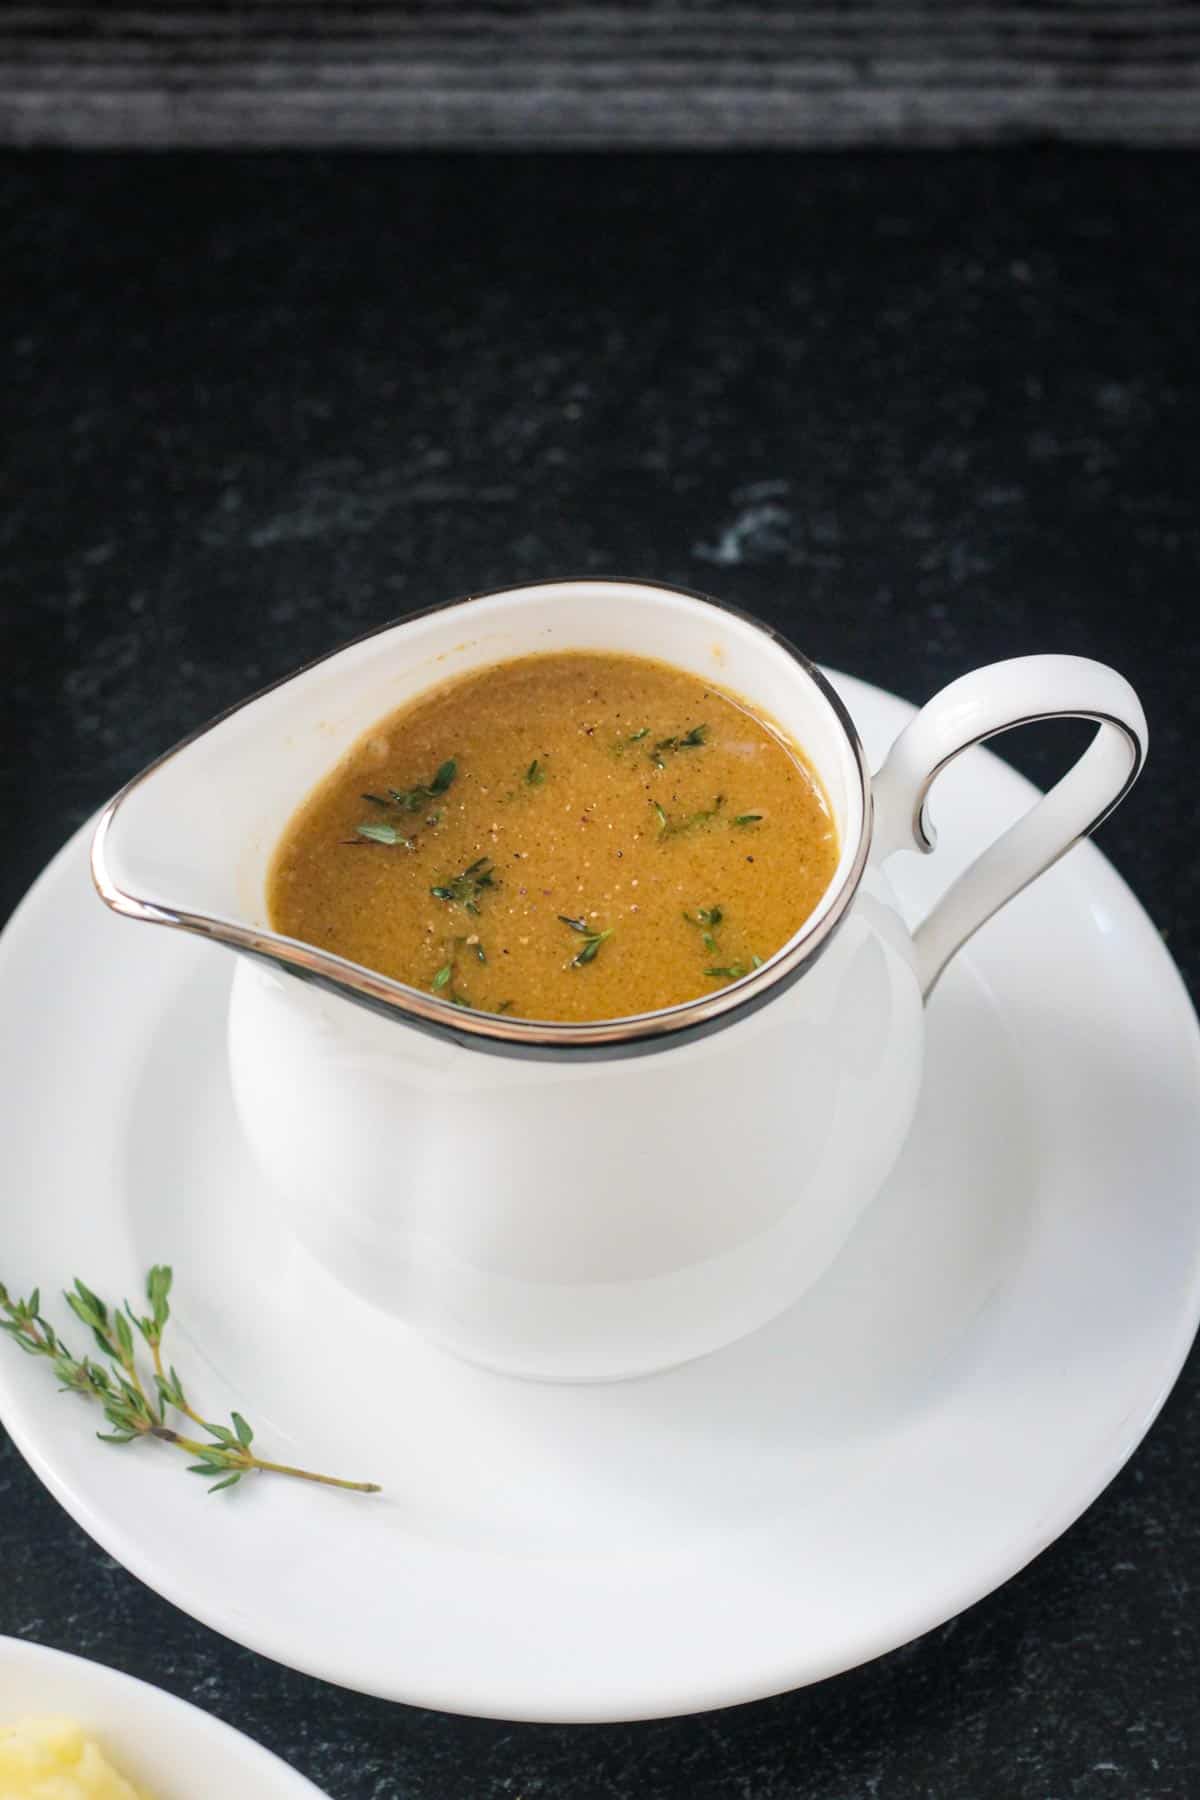 Small white pitcher of gravy garnished with fresh thyme leaves.